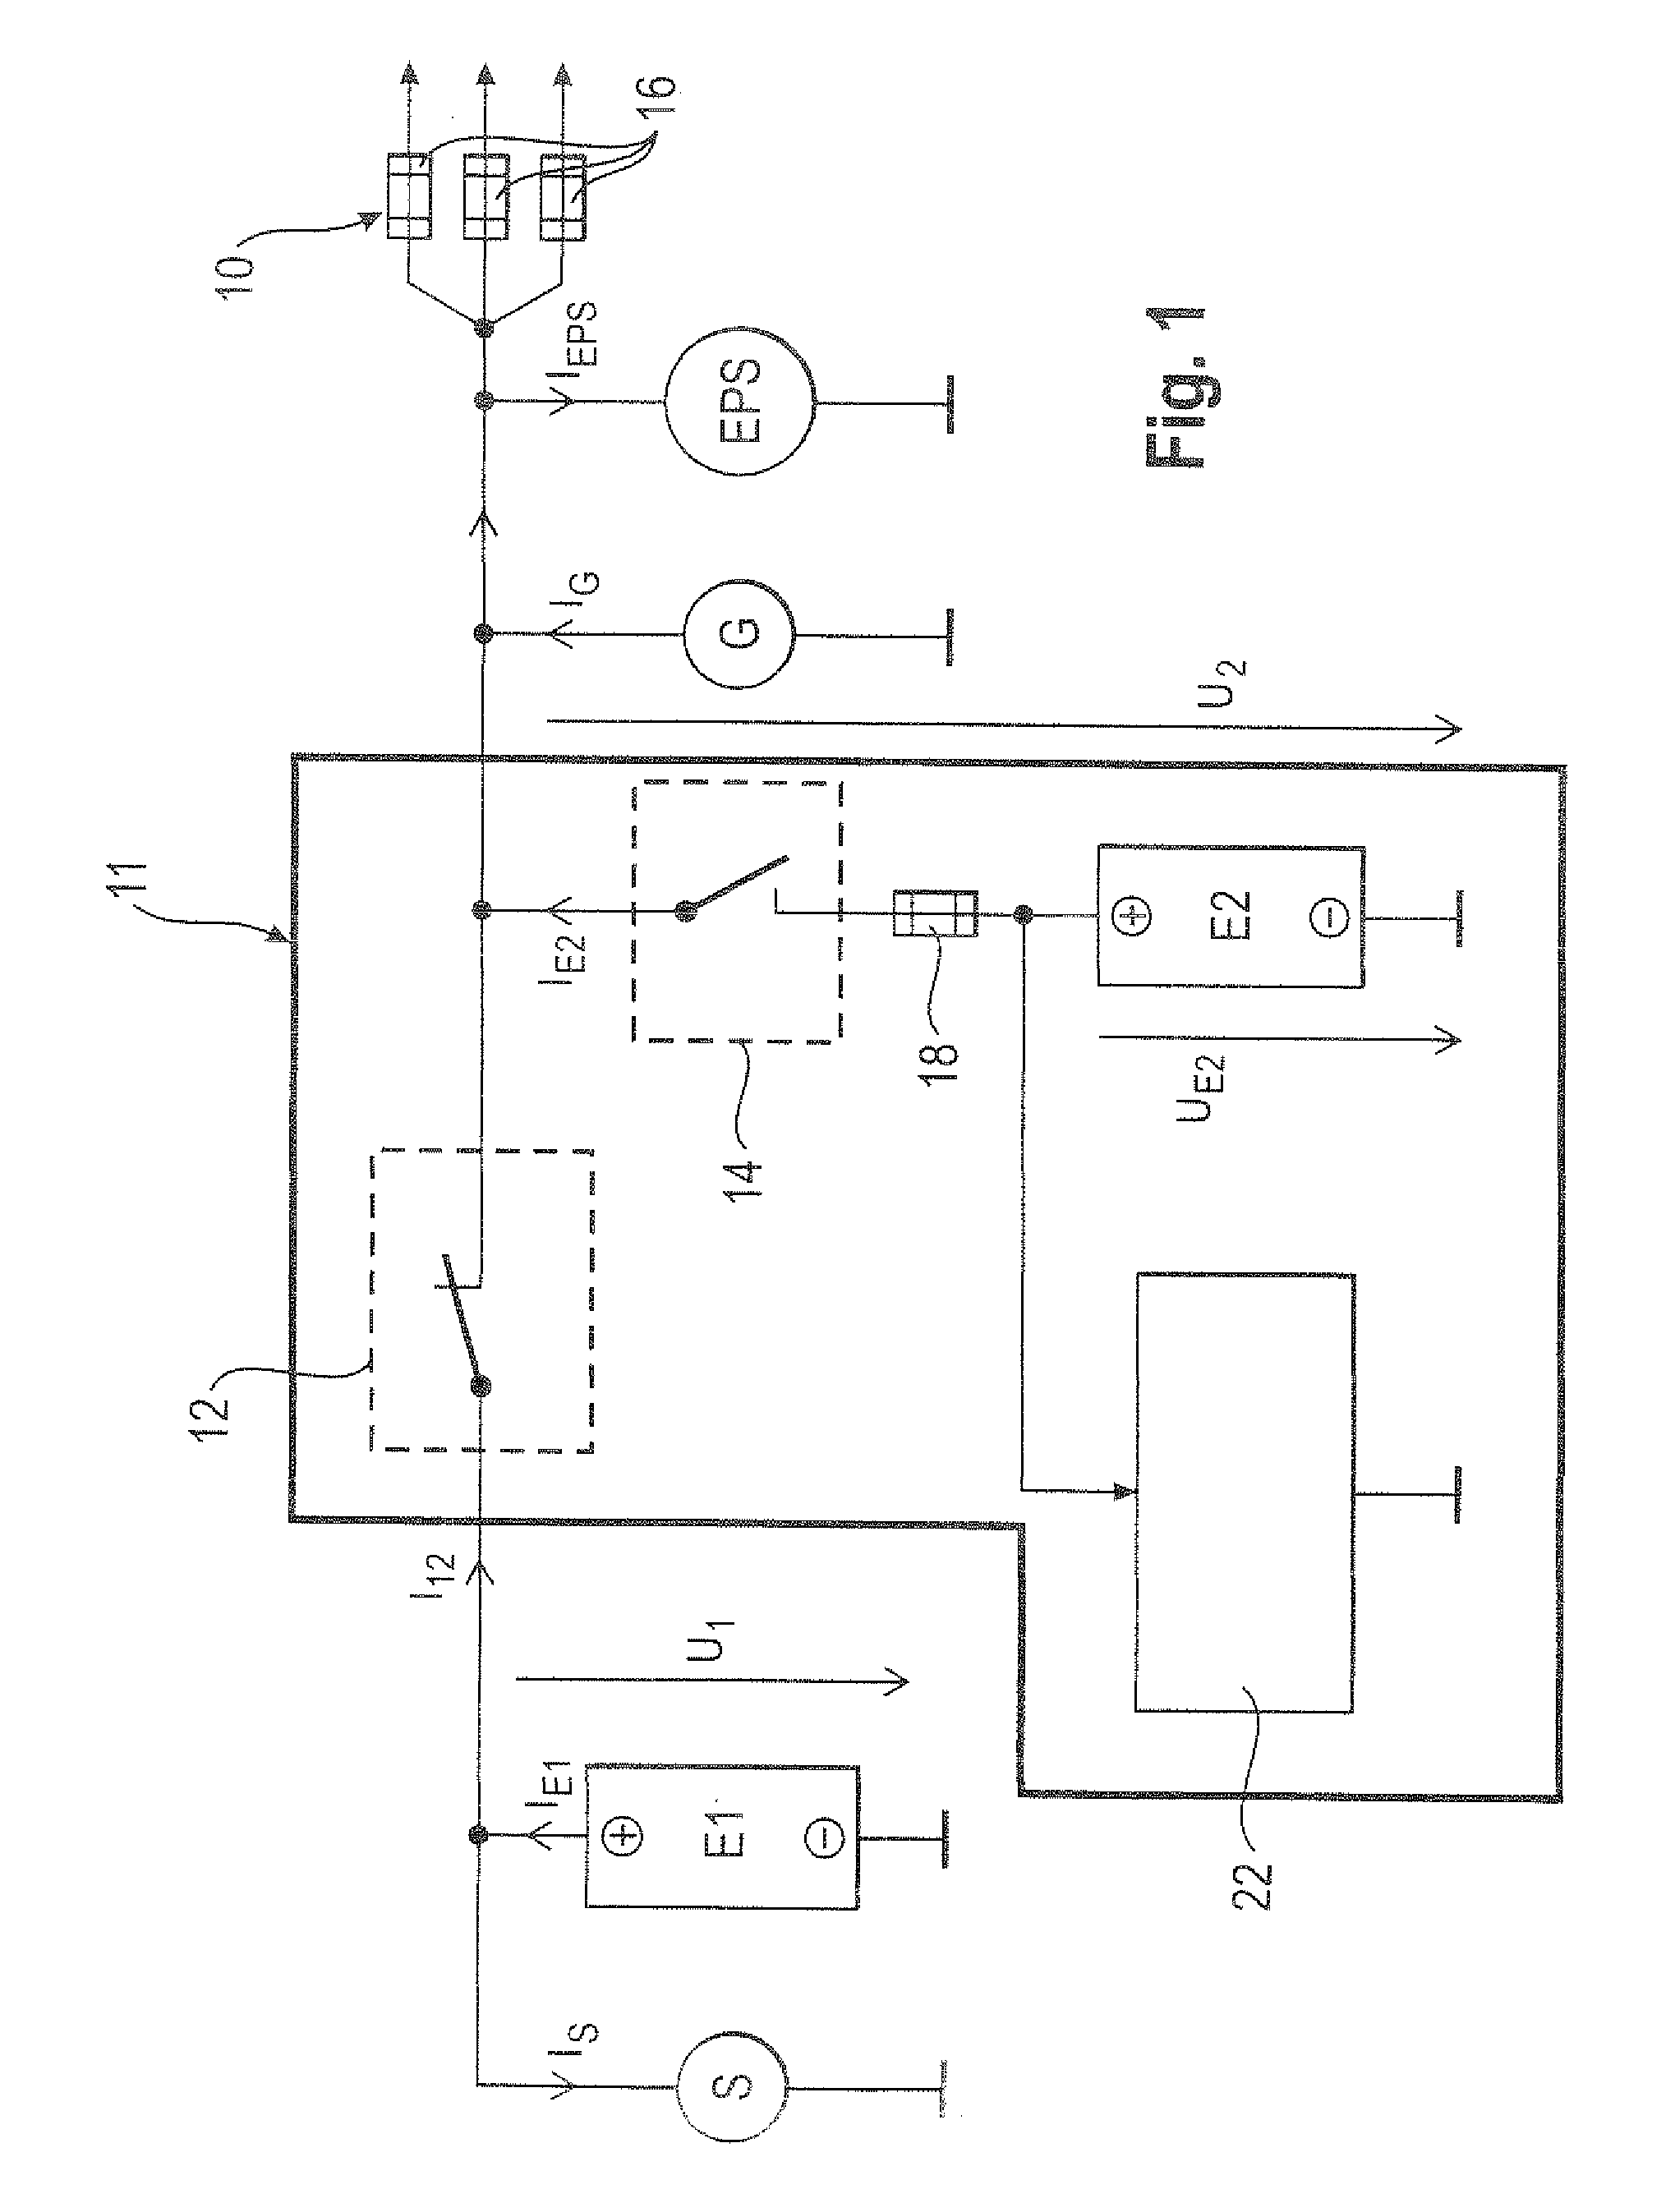 Circuit for voltage stabilization in an onboard power supply